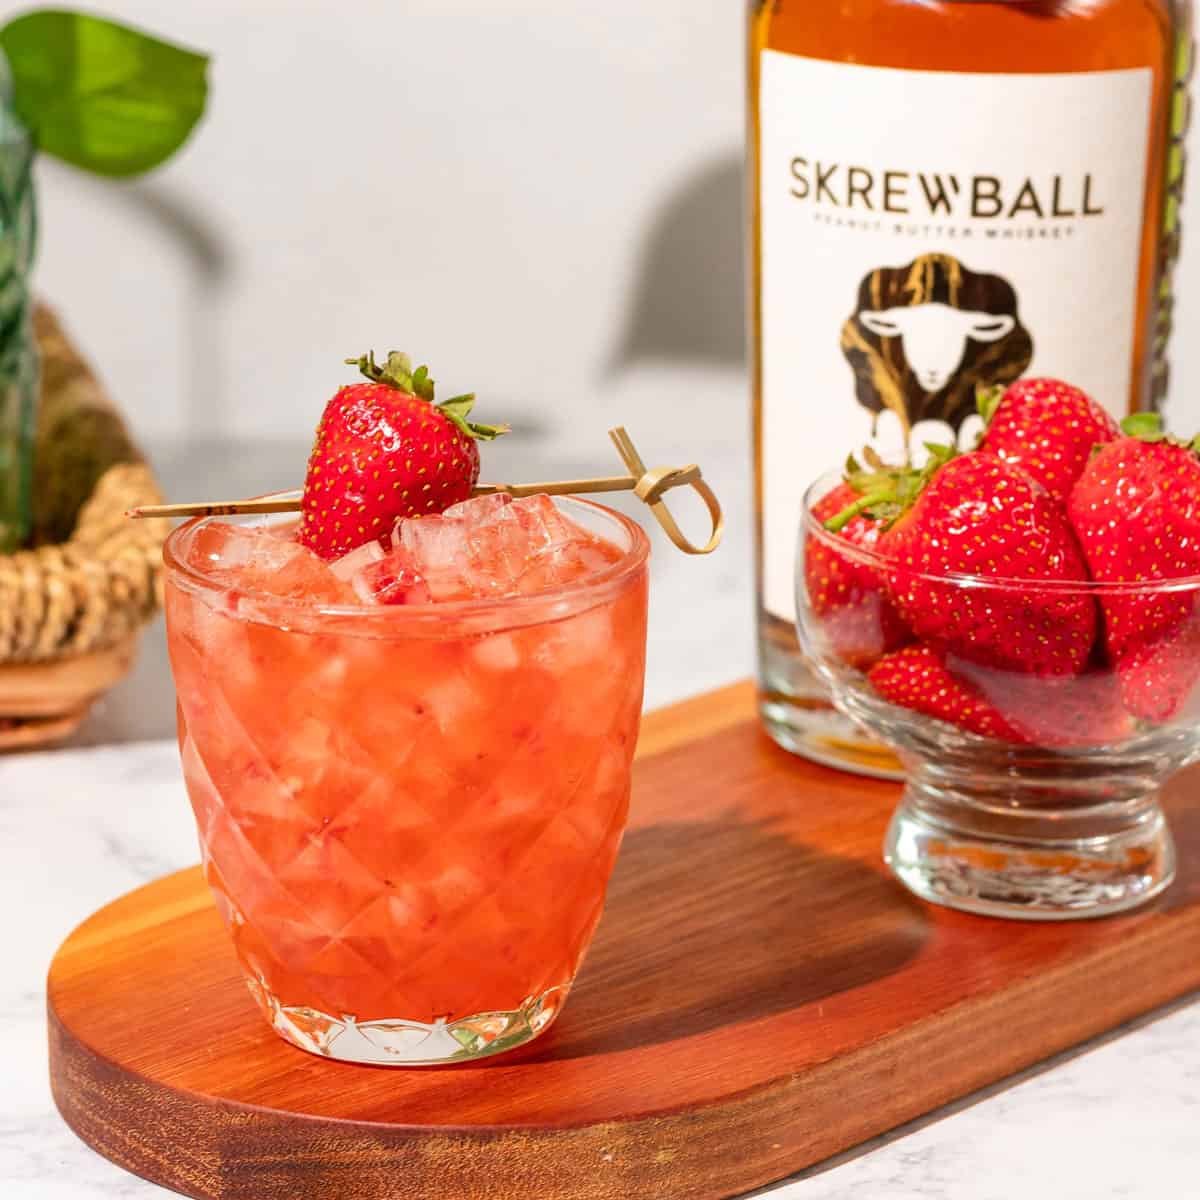 Peanut butter and jelly cocktail sitting on a wood cutting board with a bowl of strawberries and a bottle of Skrewball peanut butter whiskey in the background.